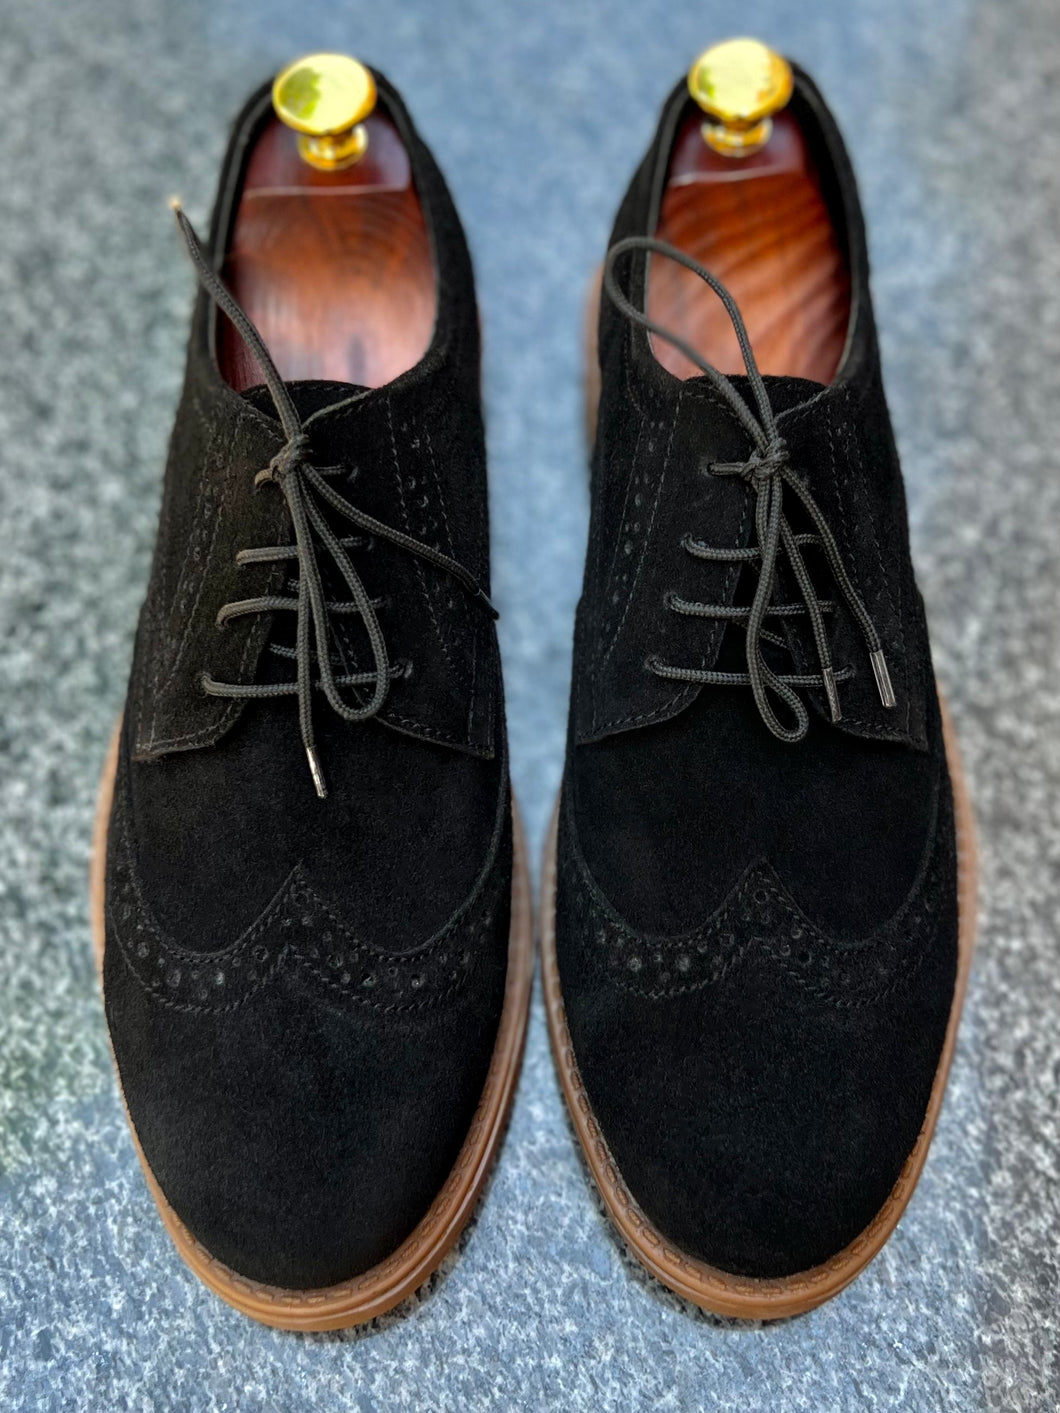 Black Suede Leather Brogue Shoes